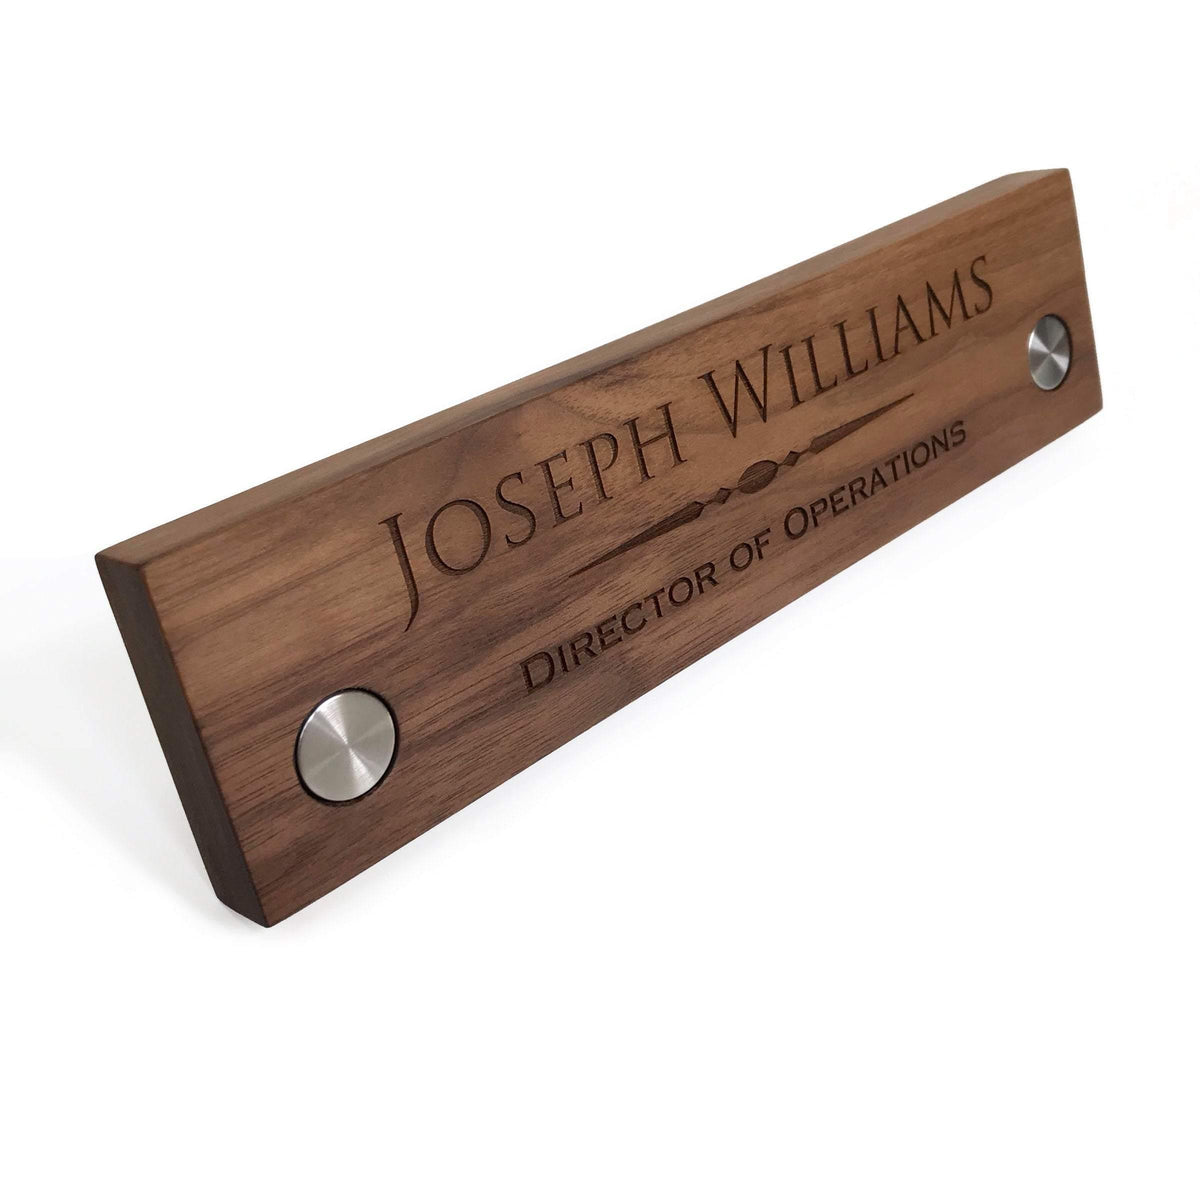 Engraved Desk Name Plate, Personalized name plate / Laser engraved, Hardwood, Desk name plaque, desk plaque, Desk name personalized - RCH Gifts